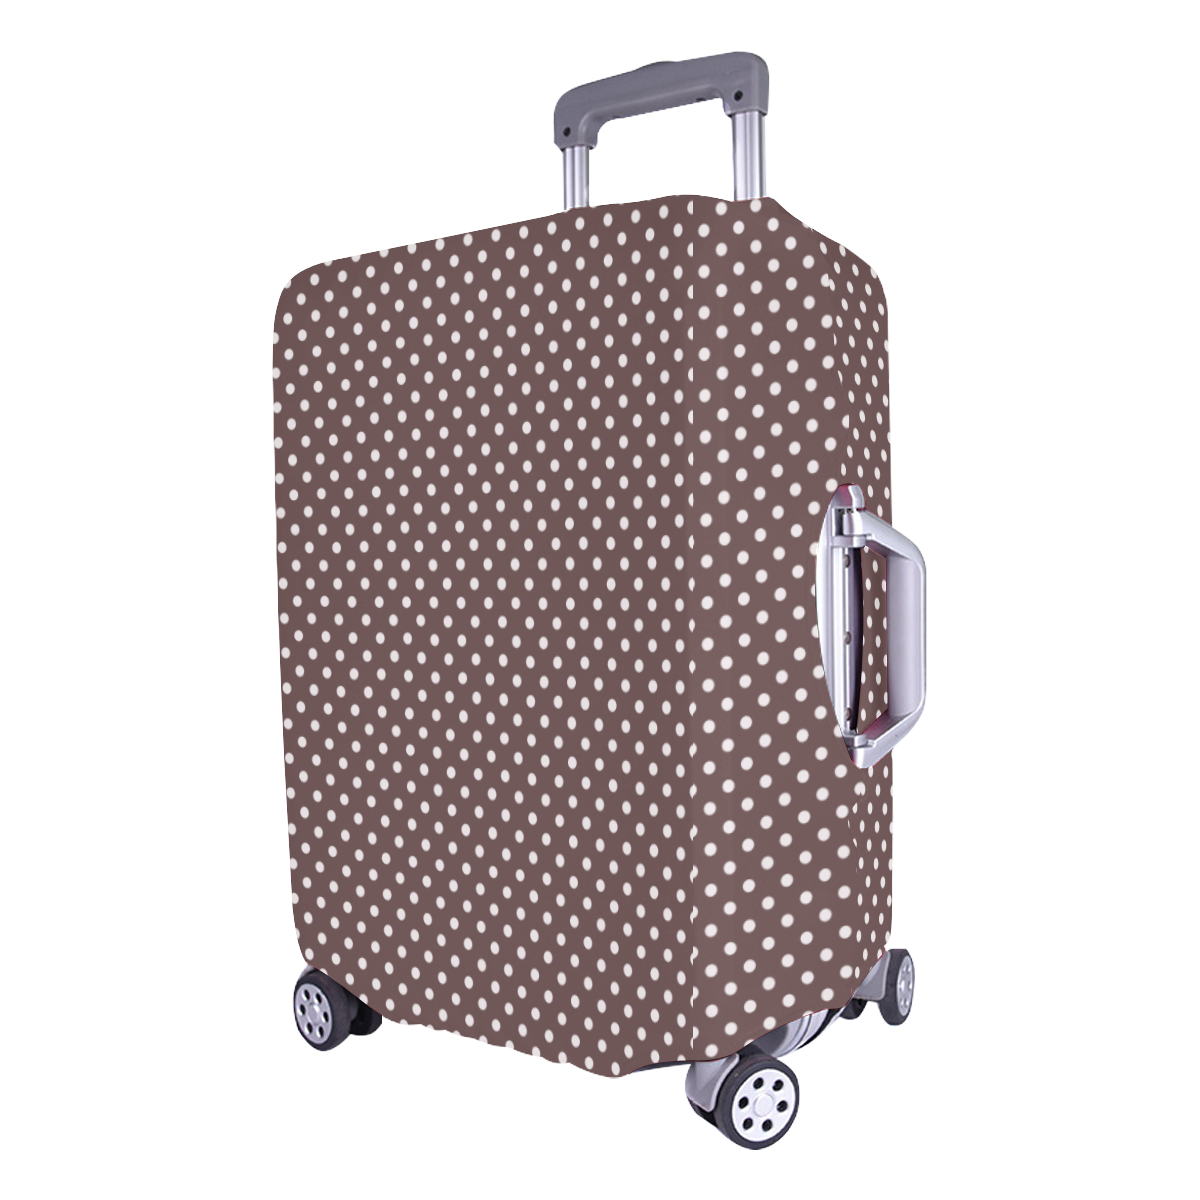 Chocolate brown polka dots Luggage Cover/Large 26"-28"